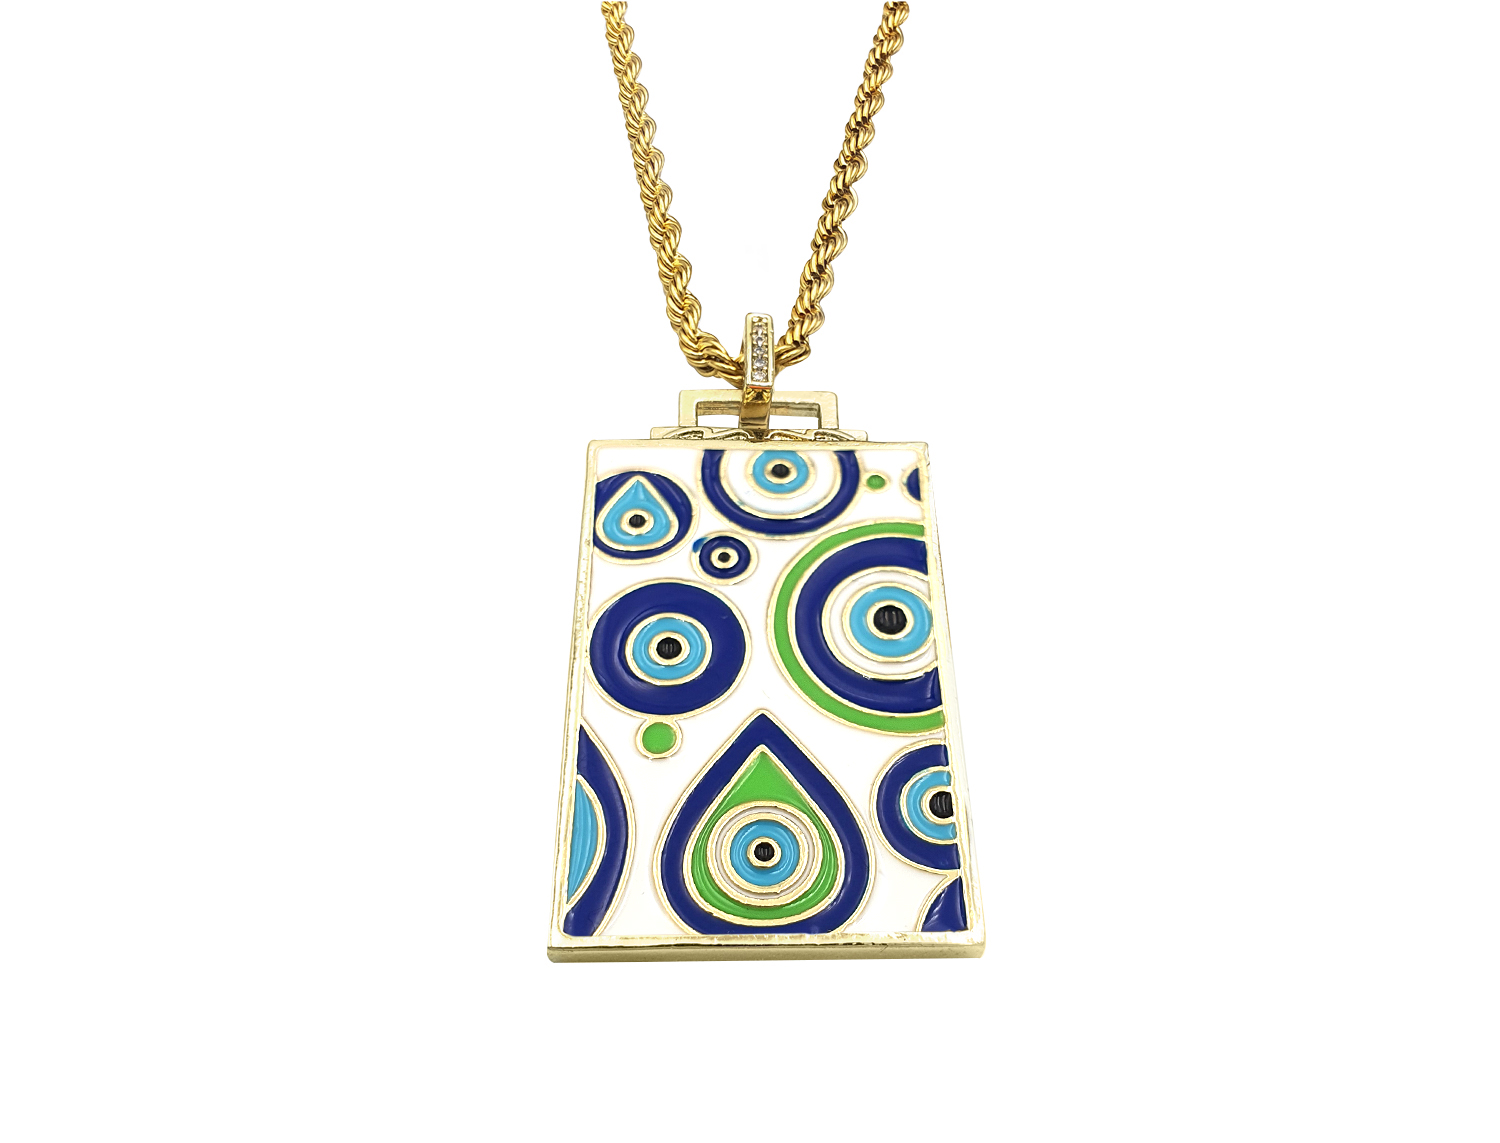 Enamel White Necklace Gold Plated - Adema